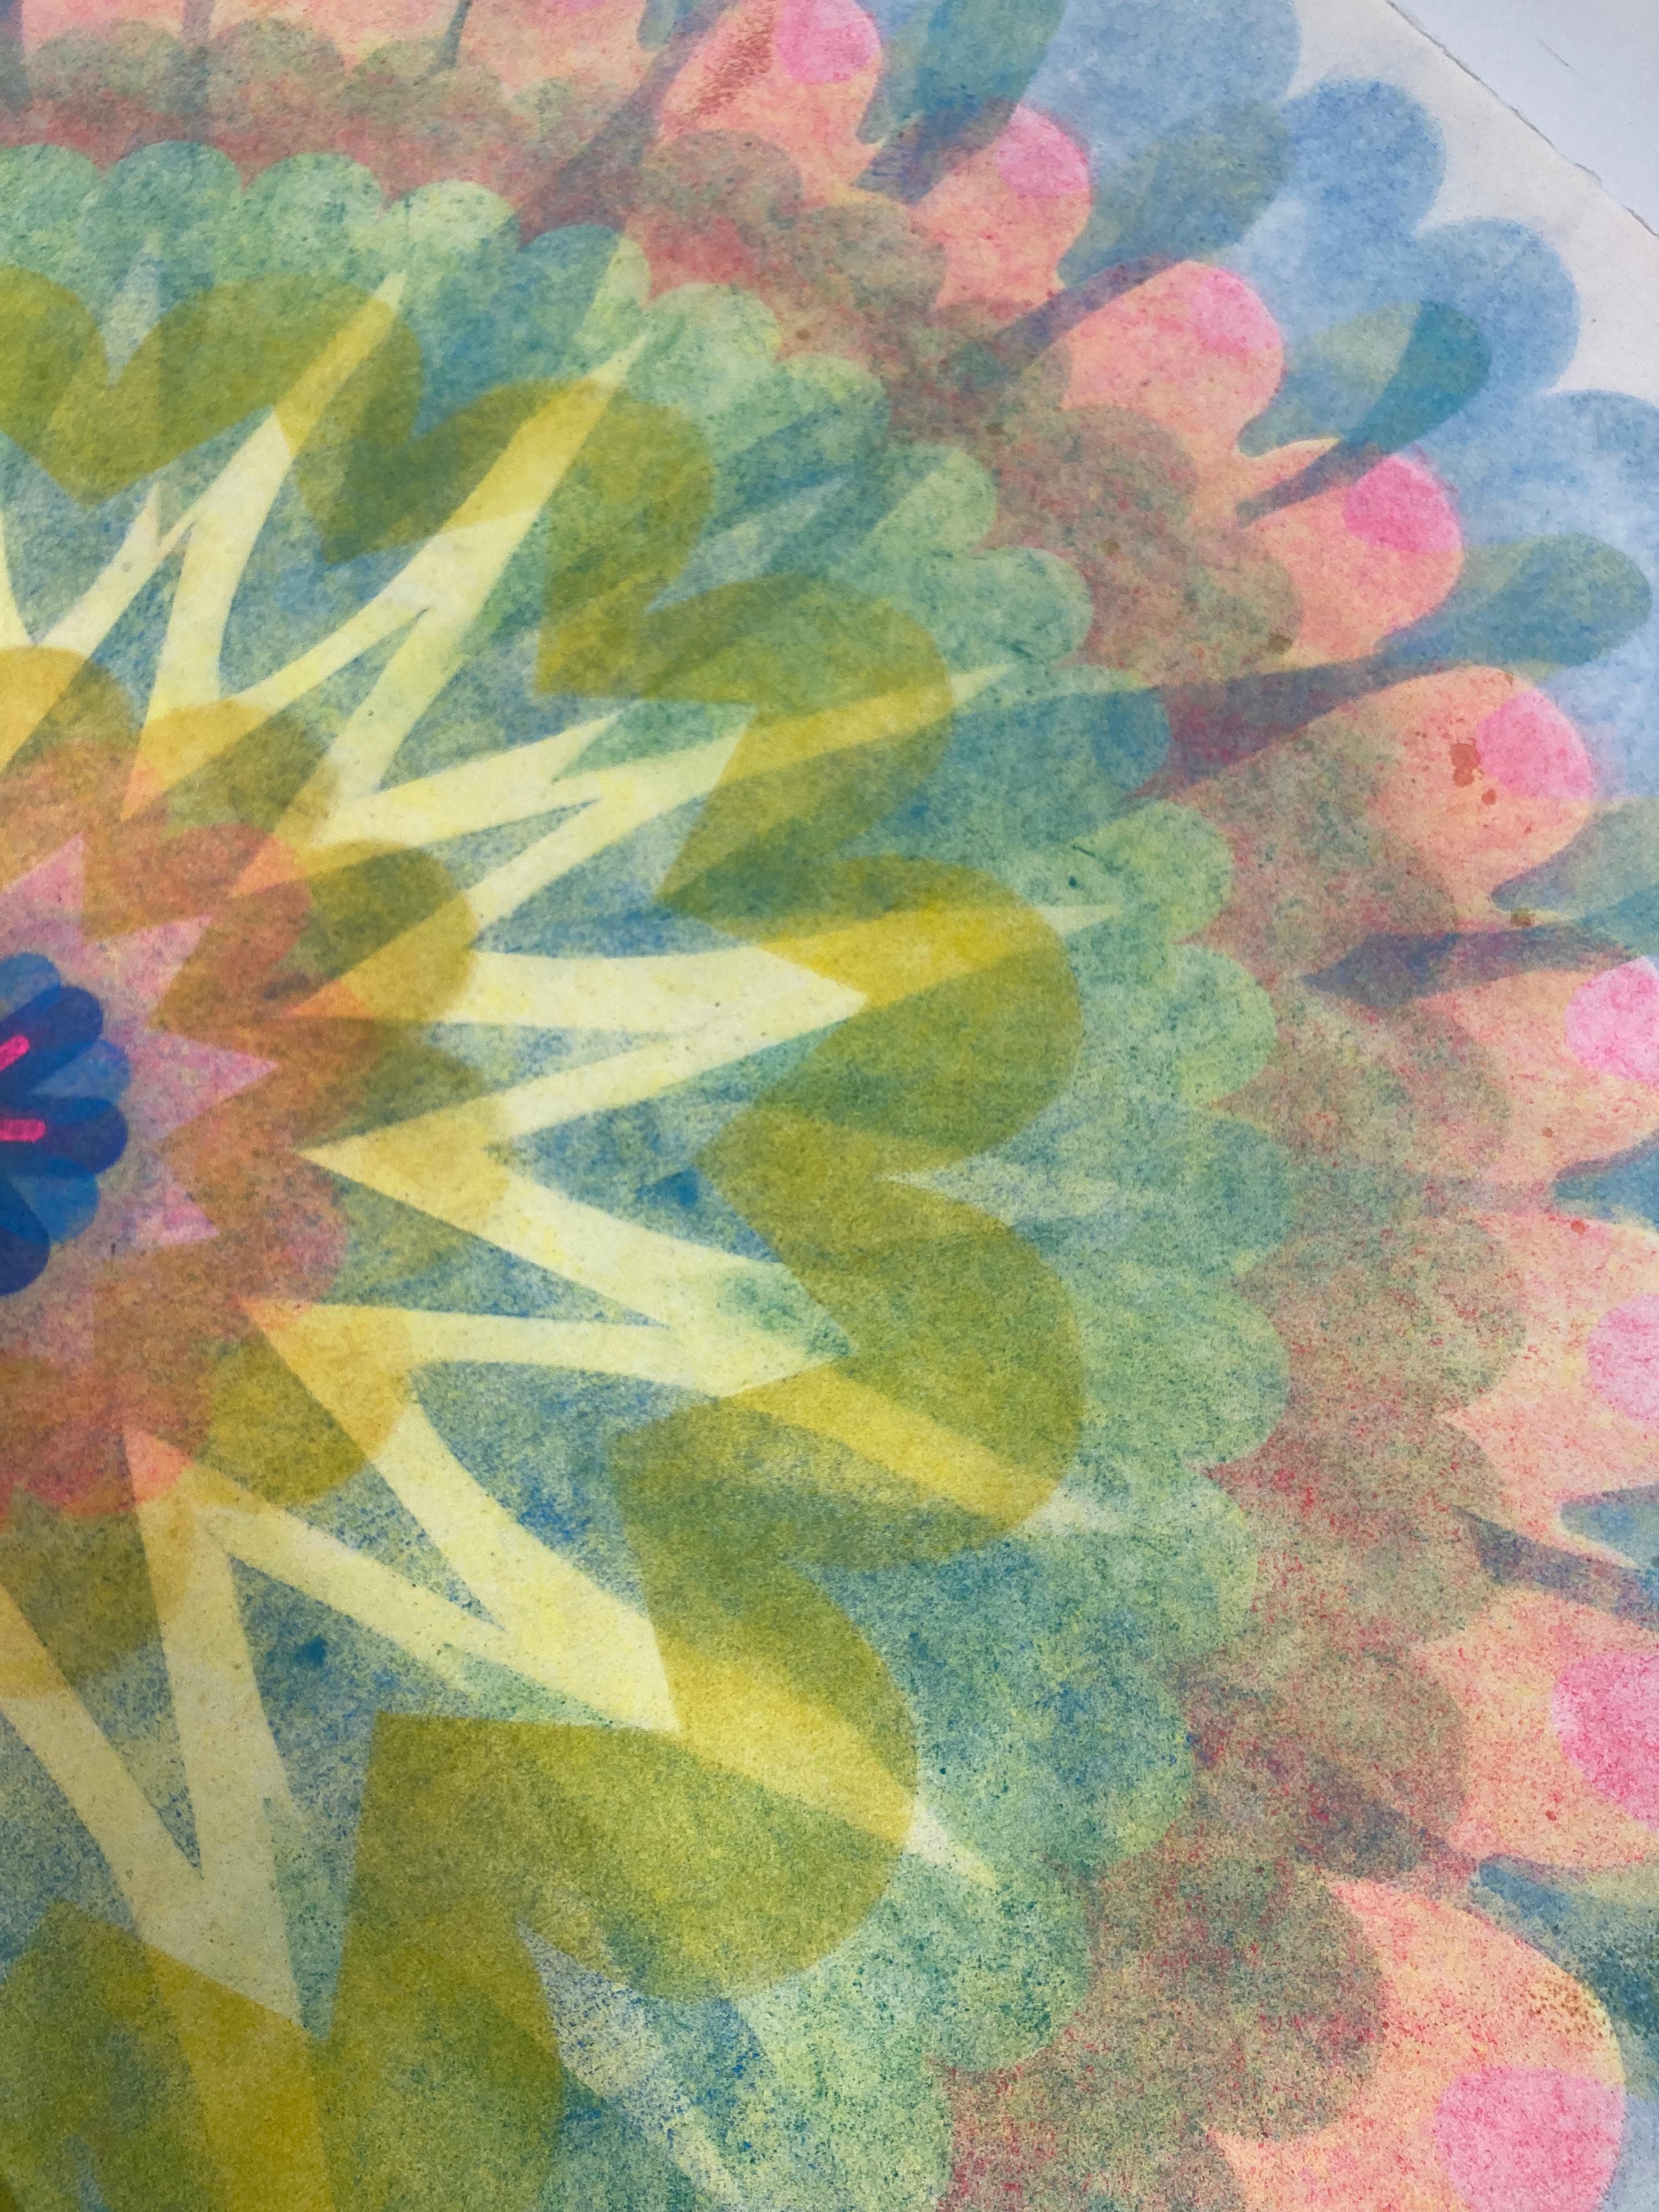 This multicolored drawing has a beautiful, soft mottled texture created with Judge's unique powered pigment technique. Poptic 23 is a predominately light blue, pink and golden yellow mandala shape with bright neon pink and blue at the center,